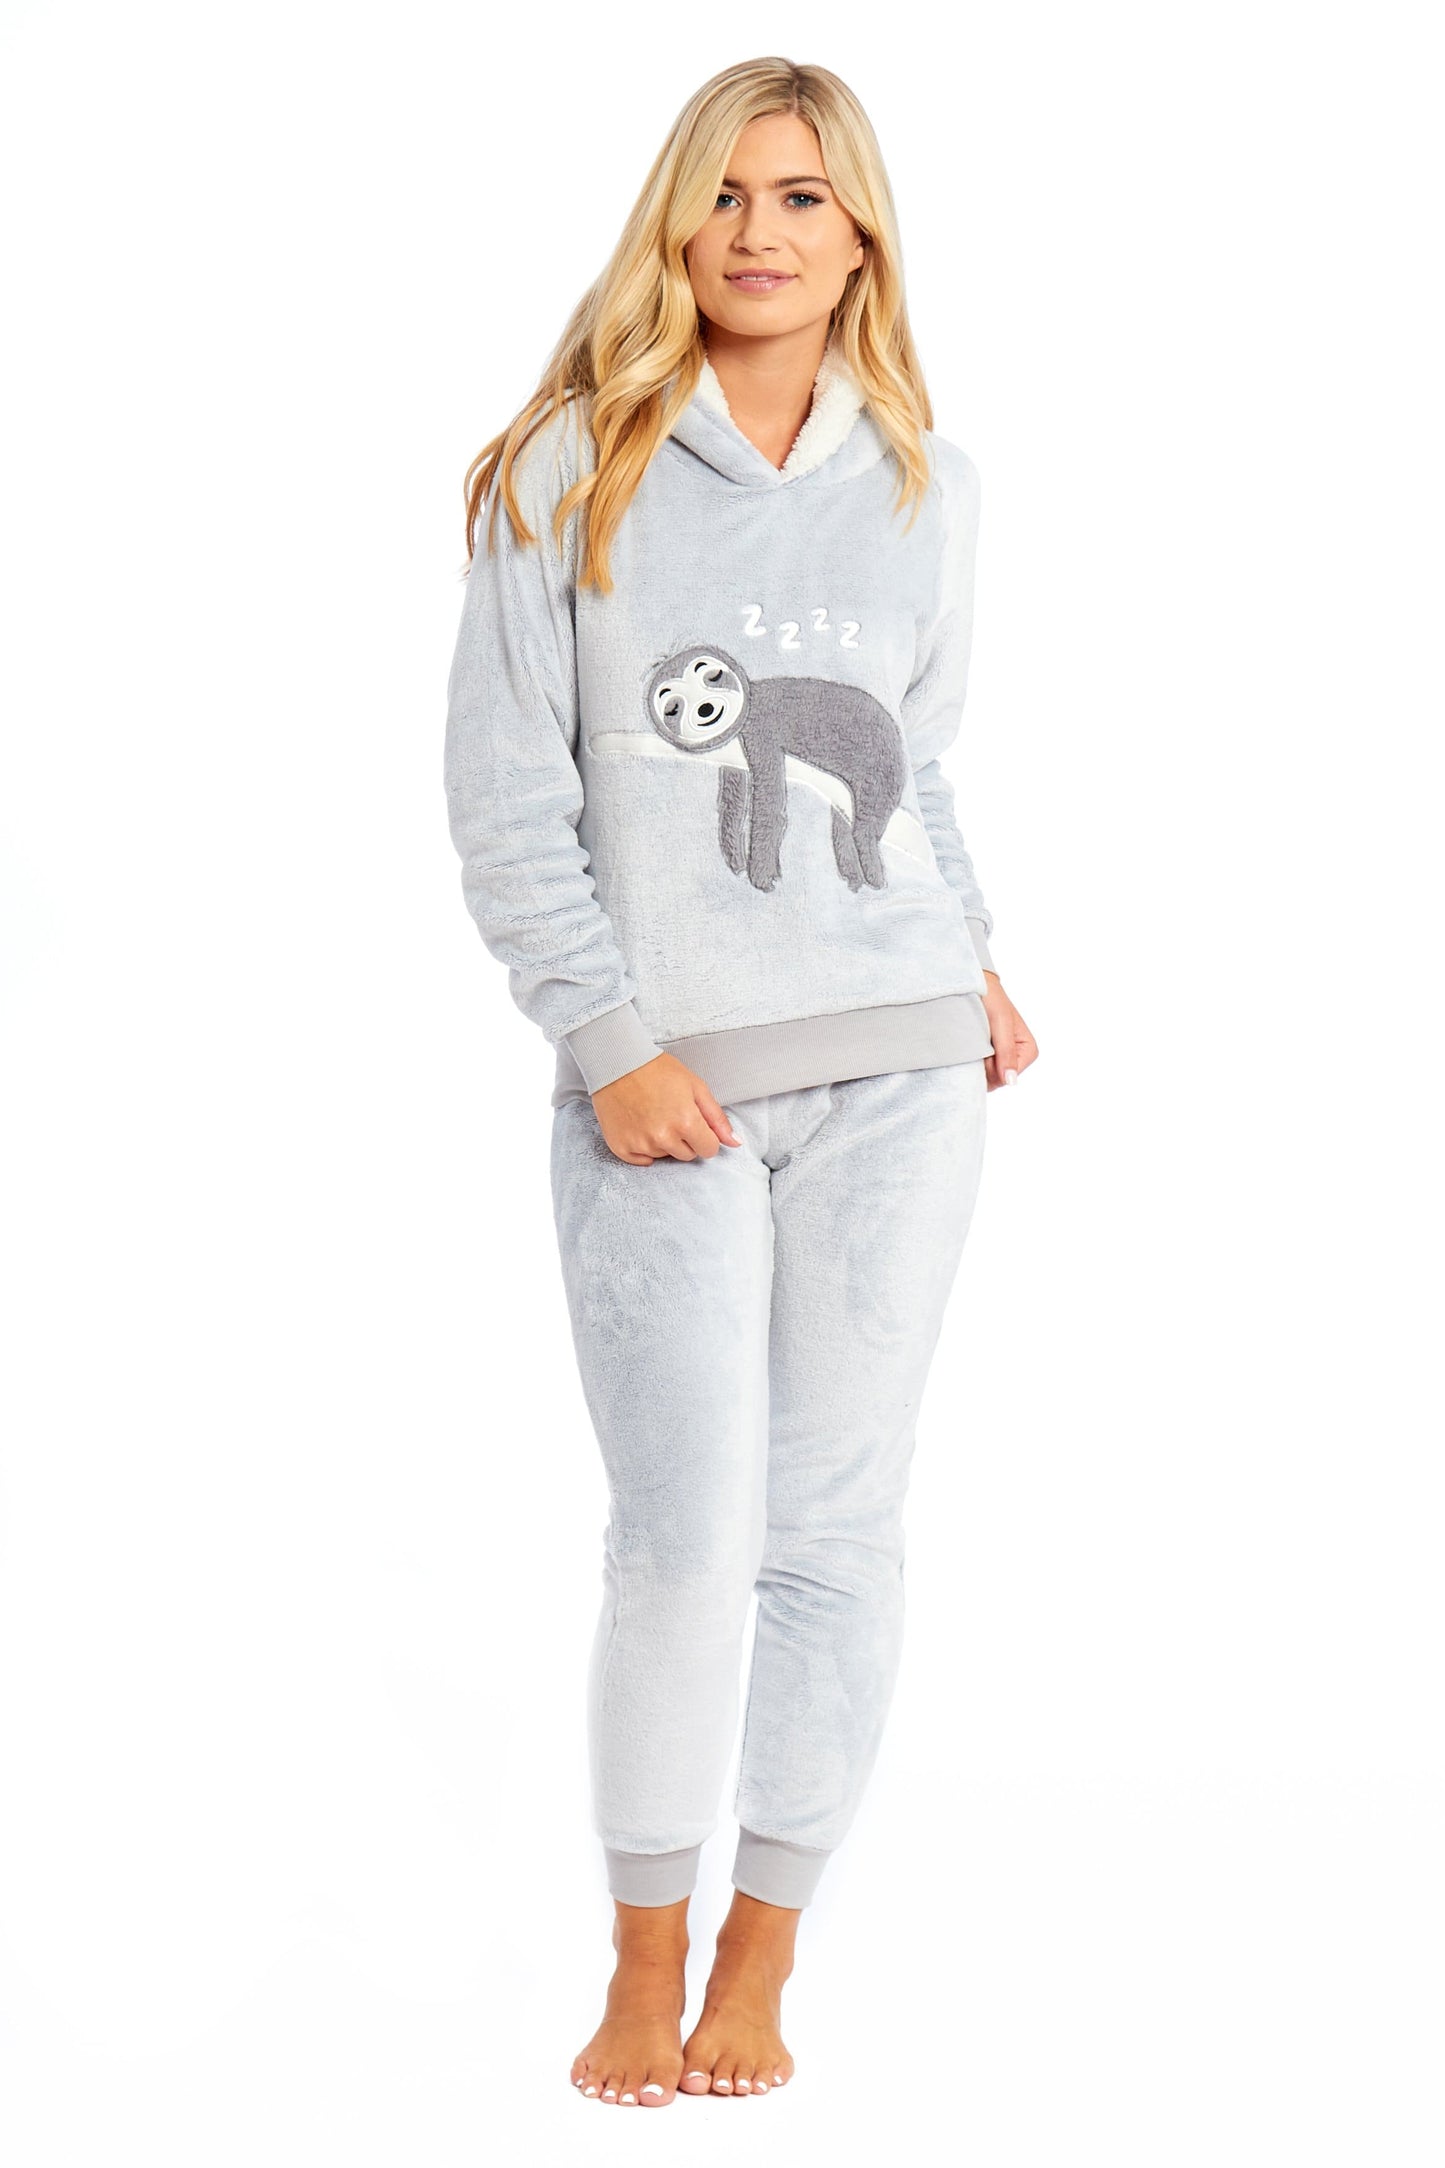 Cuddly Lazy Sloth Plush Fleece Hooded Pyjama Set By OLIVIA ROCCO, Soft &  Comfortable, Boutique Nightwear, Fluffy Loungewear, Cosy Everyday PJs, The  Perfect Mother & Daughter Gift Idea